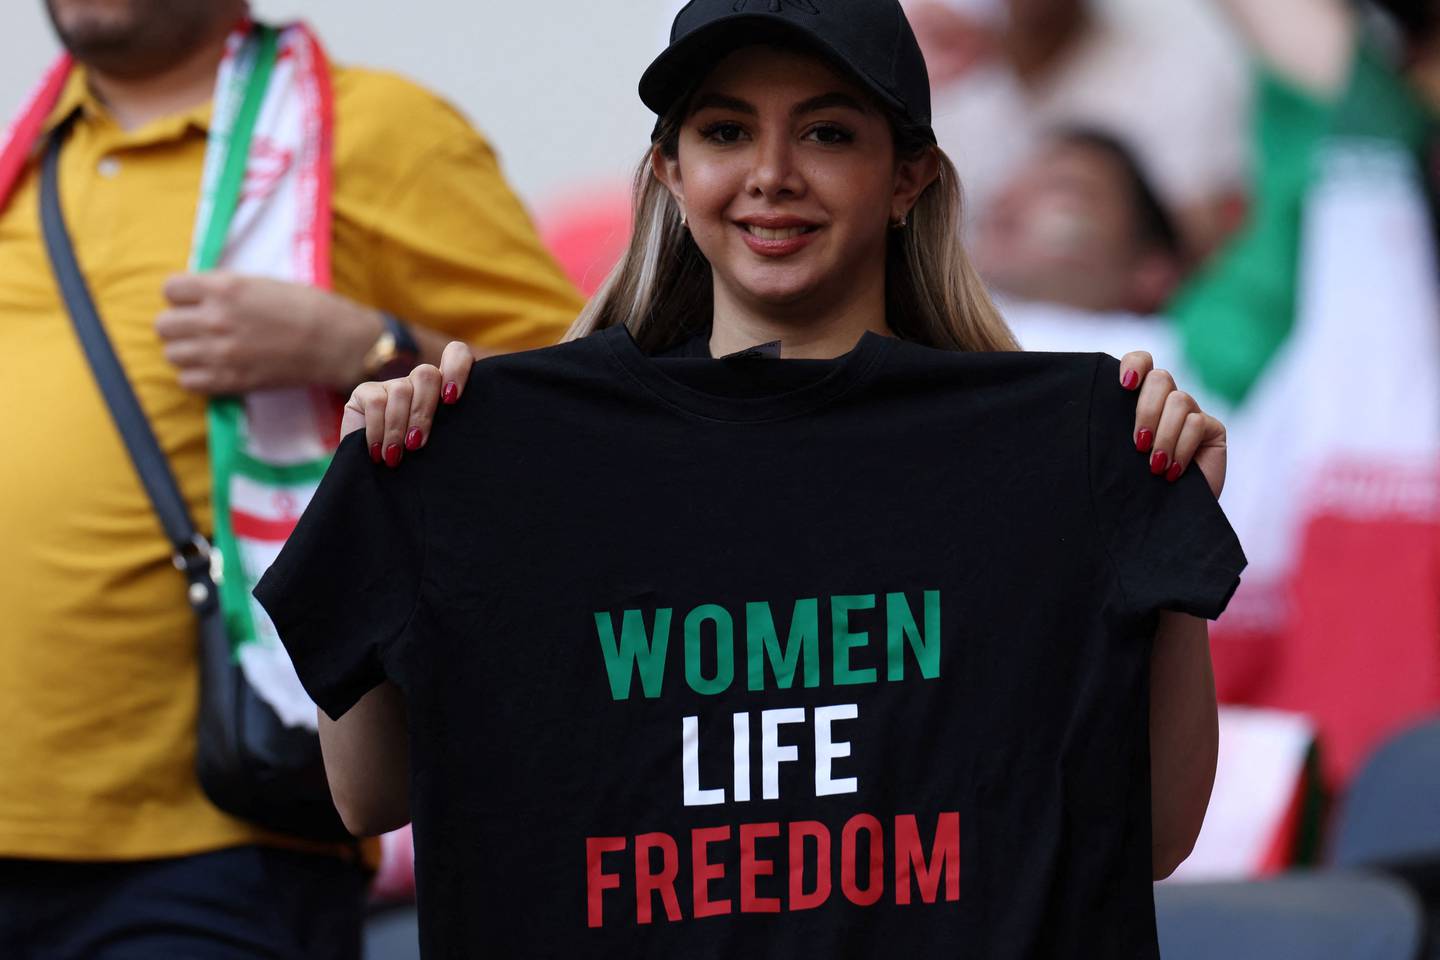 A woman holds a T-shirt with the slogan 'Freedom for Women's Life' during a football match at the Qatar World Cup.  AFPMore